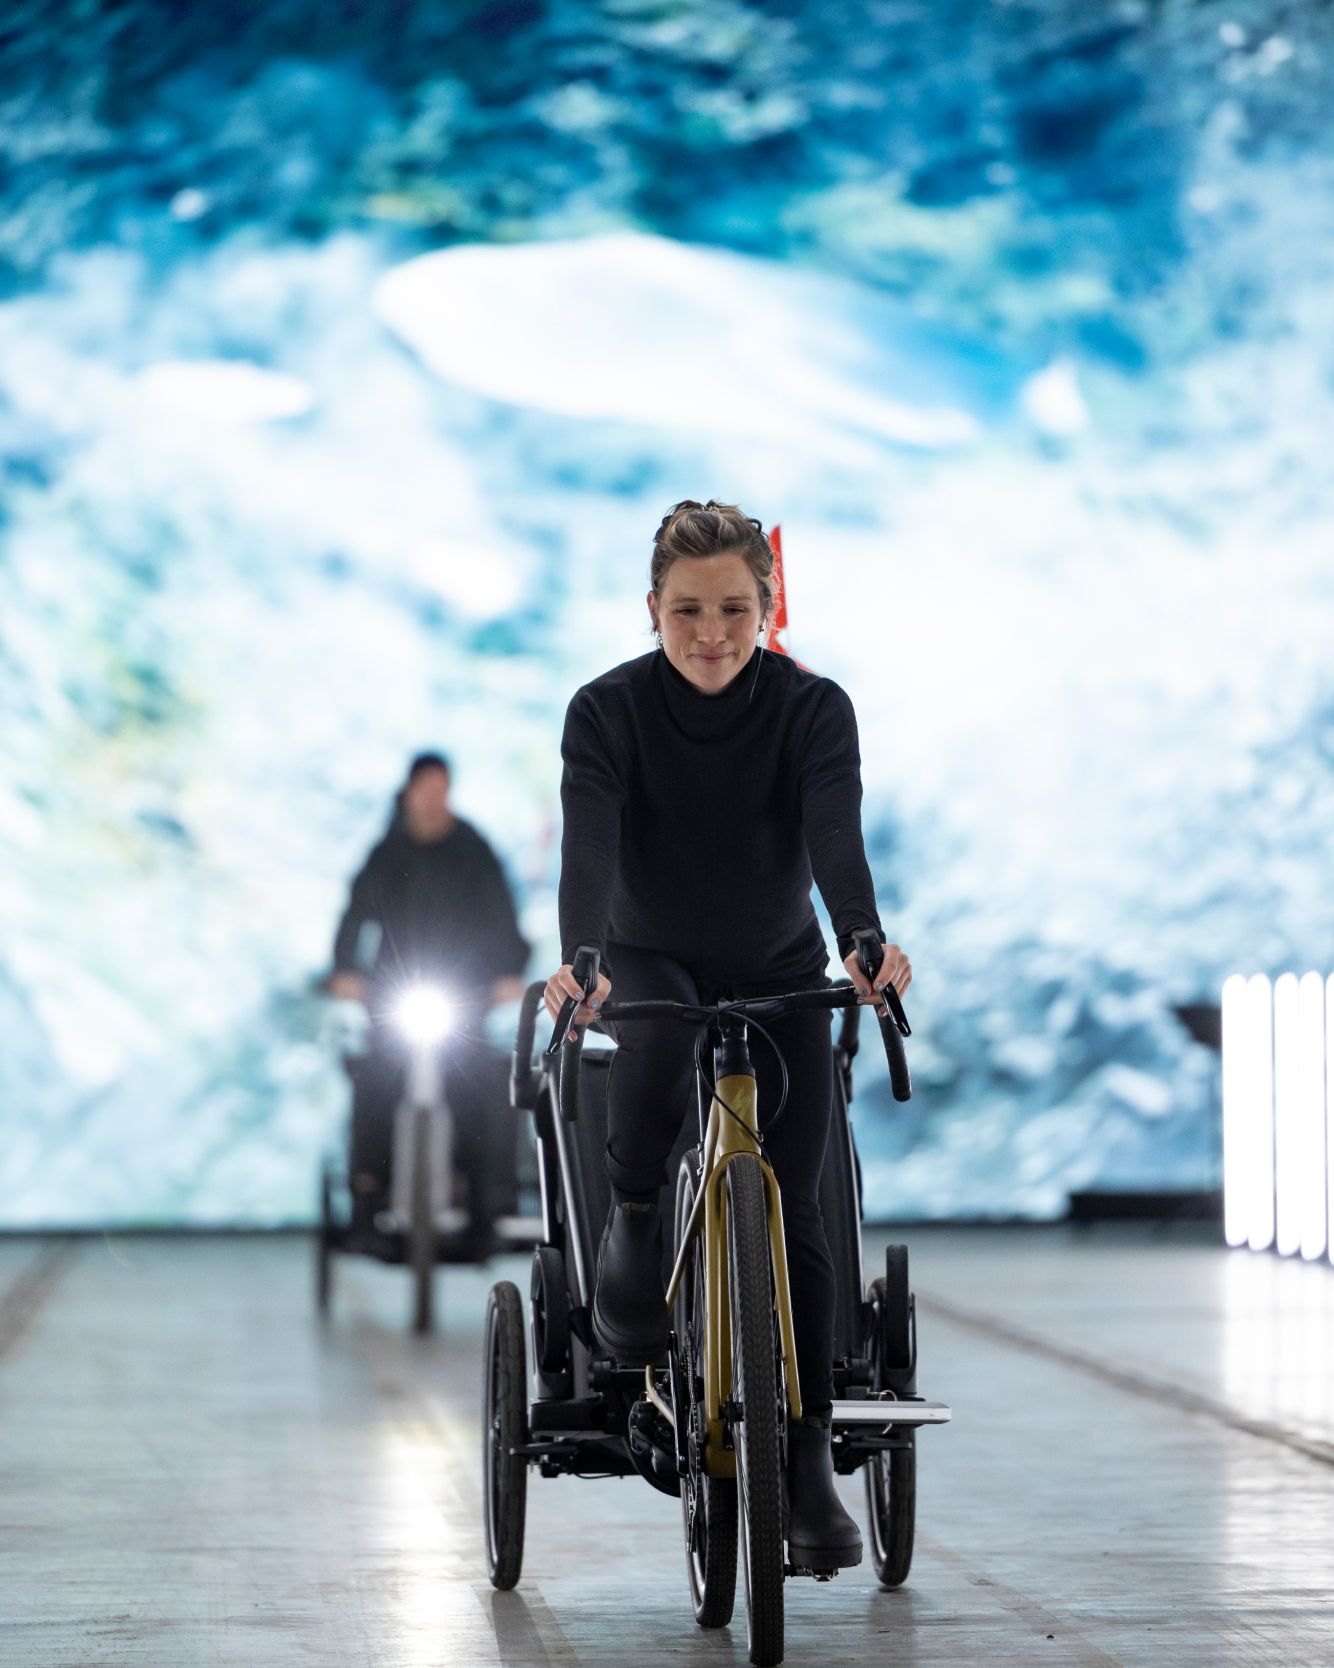 A woman wearing all black clothes riding a bicycle down a fashion runway with a Thule Chariot 3 bike trailer attached to the back. Behind her is another person blurred and also riding a bicycle down the same fashion runway.